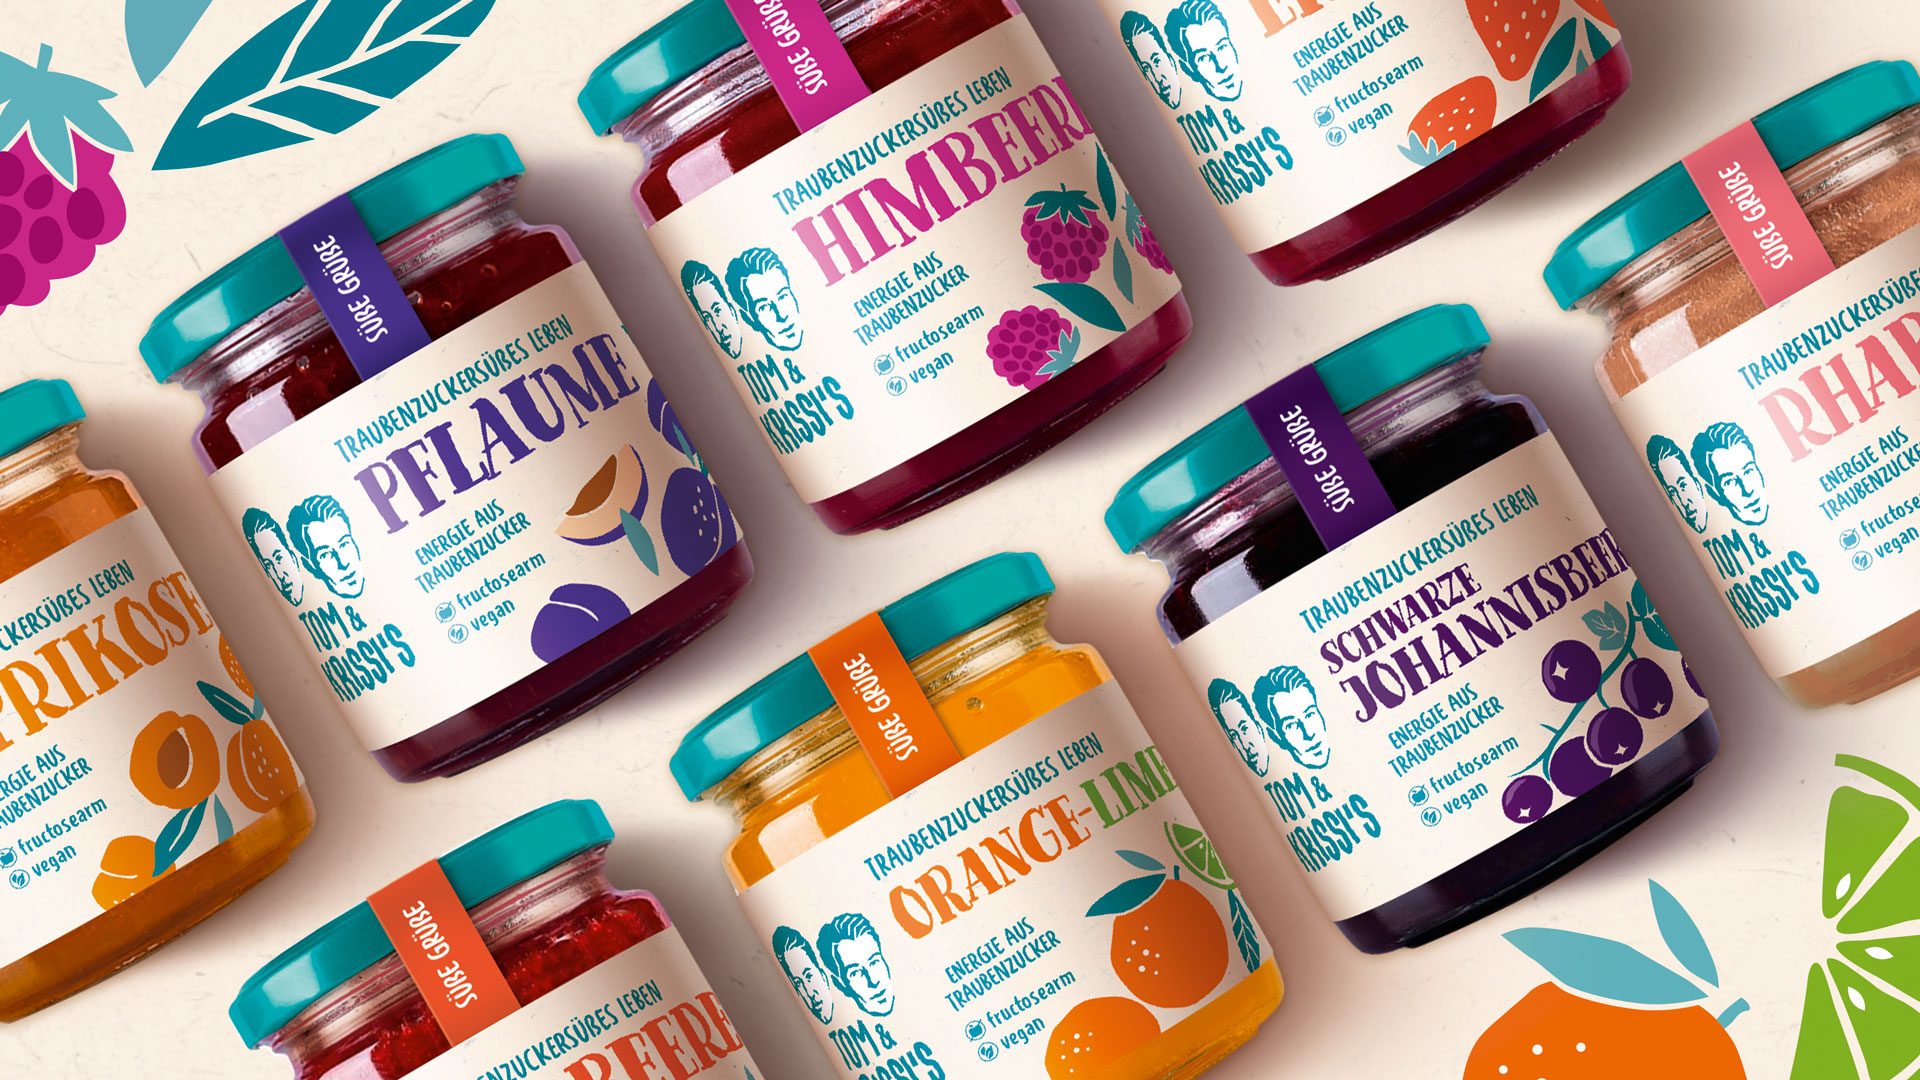 Packaging Design for Tom & Krissi’s Low-Frucose Products by Hajok